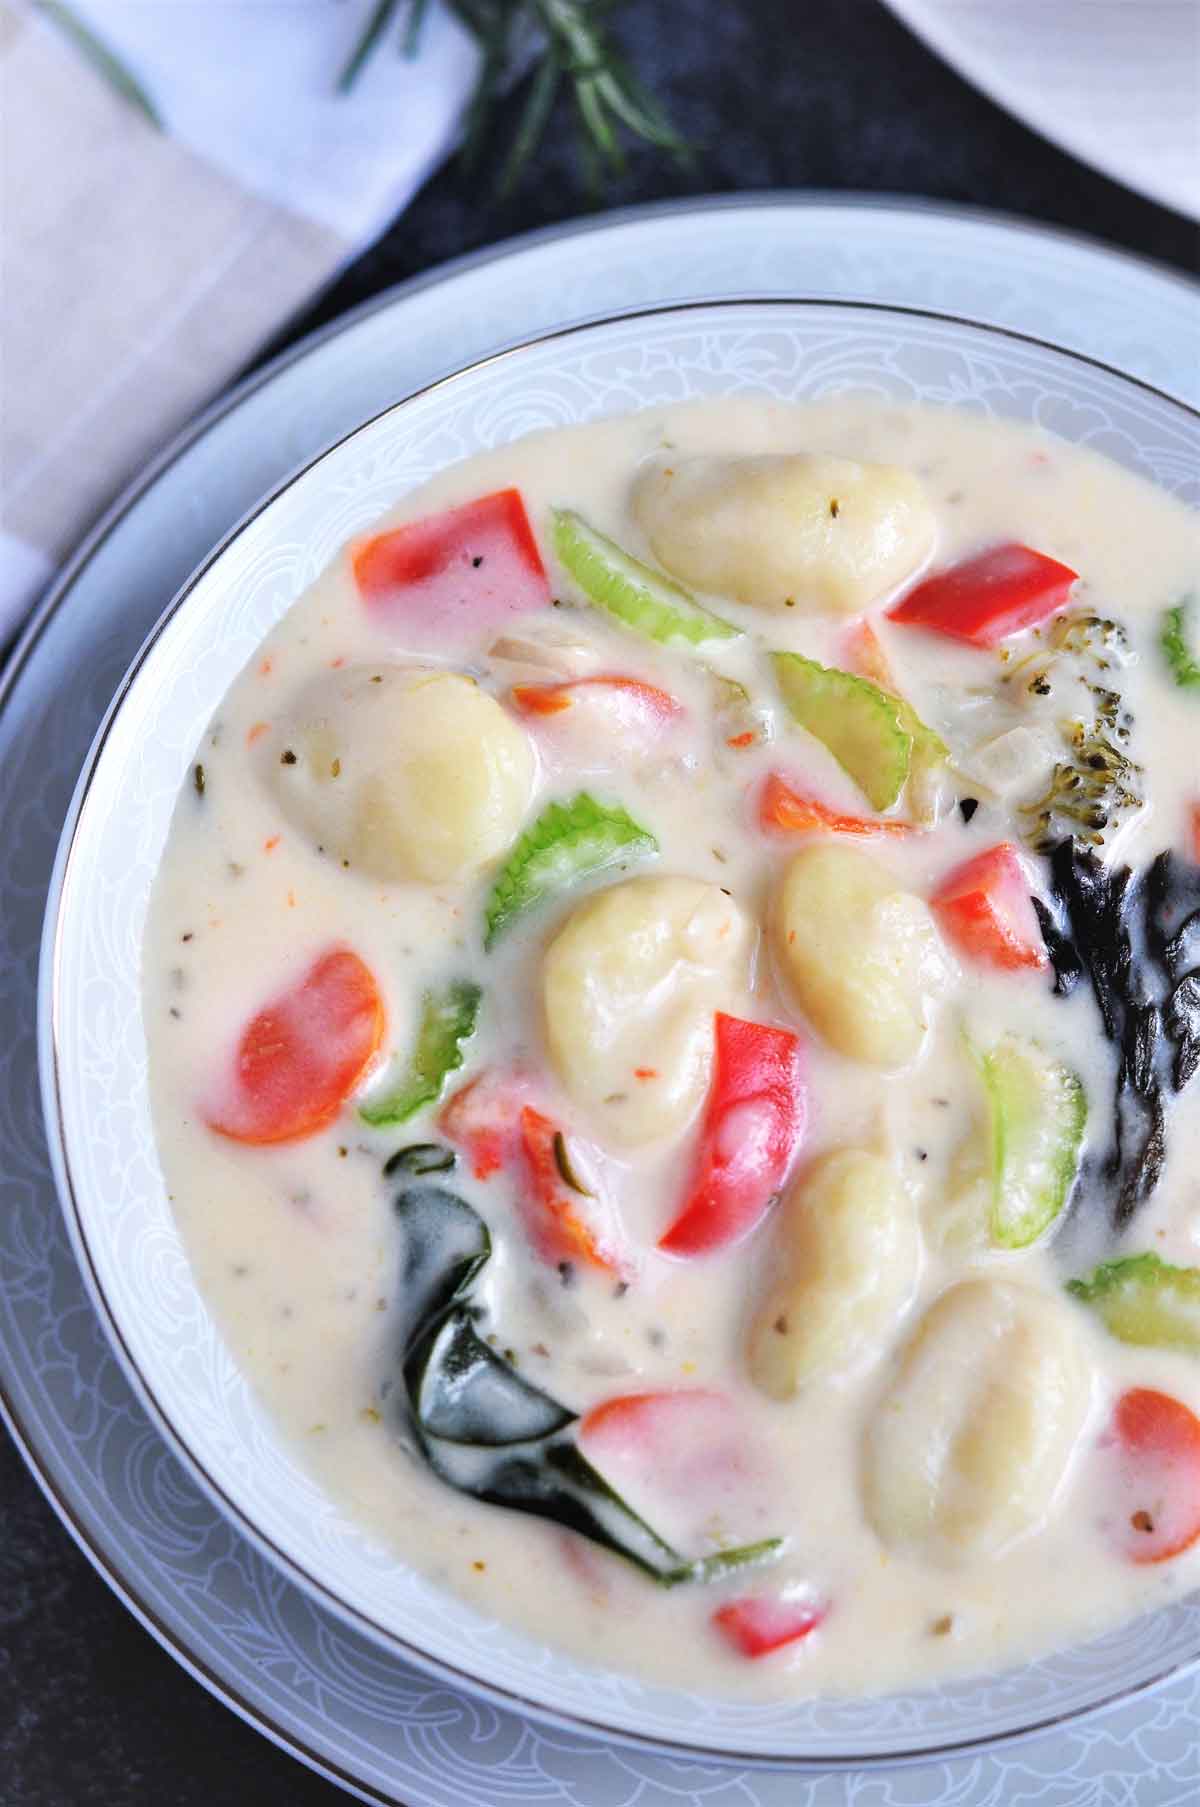 Gnocchi soup with vegetables served in a bowl.